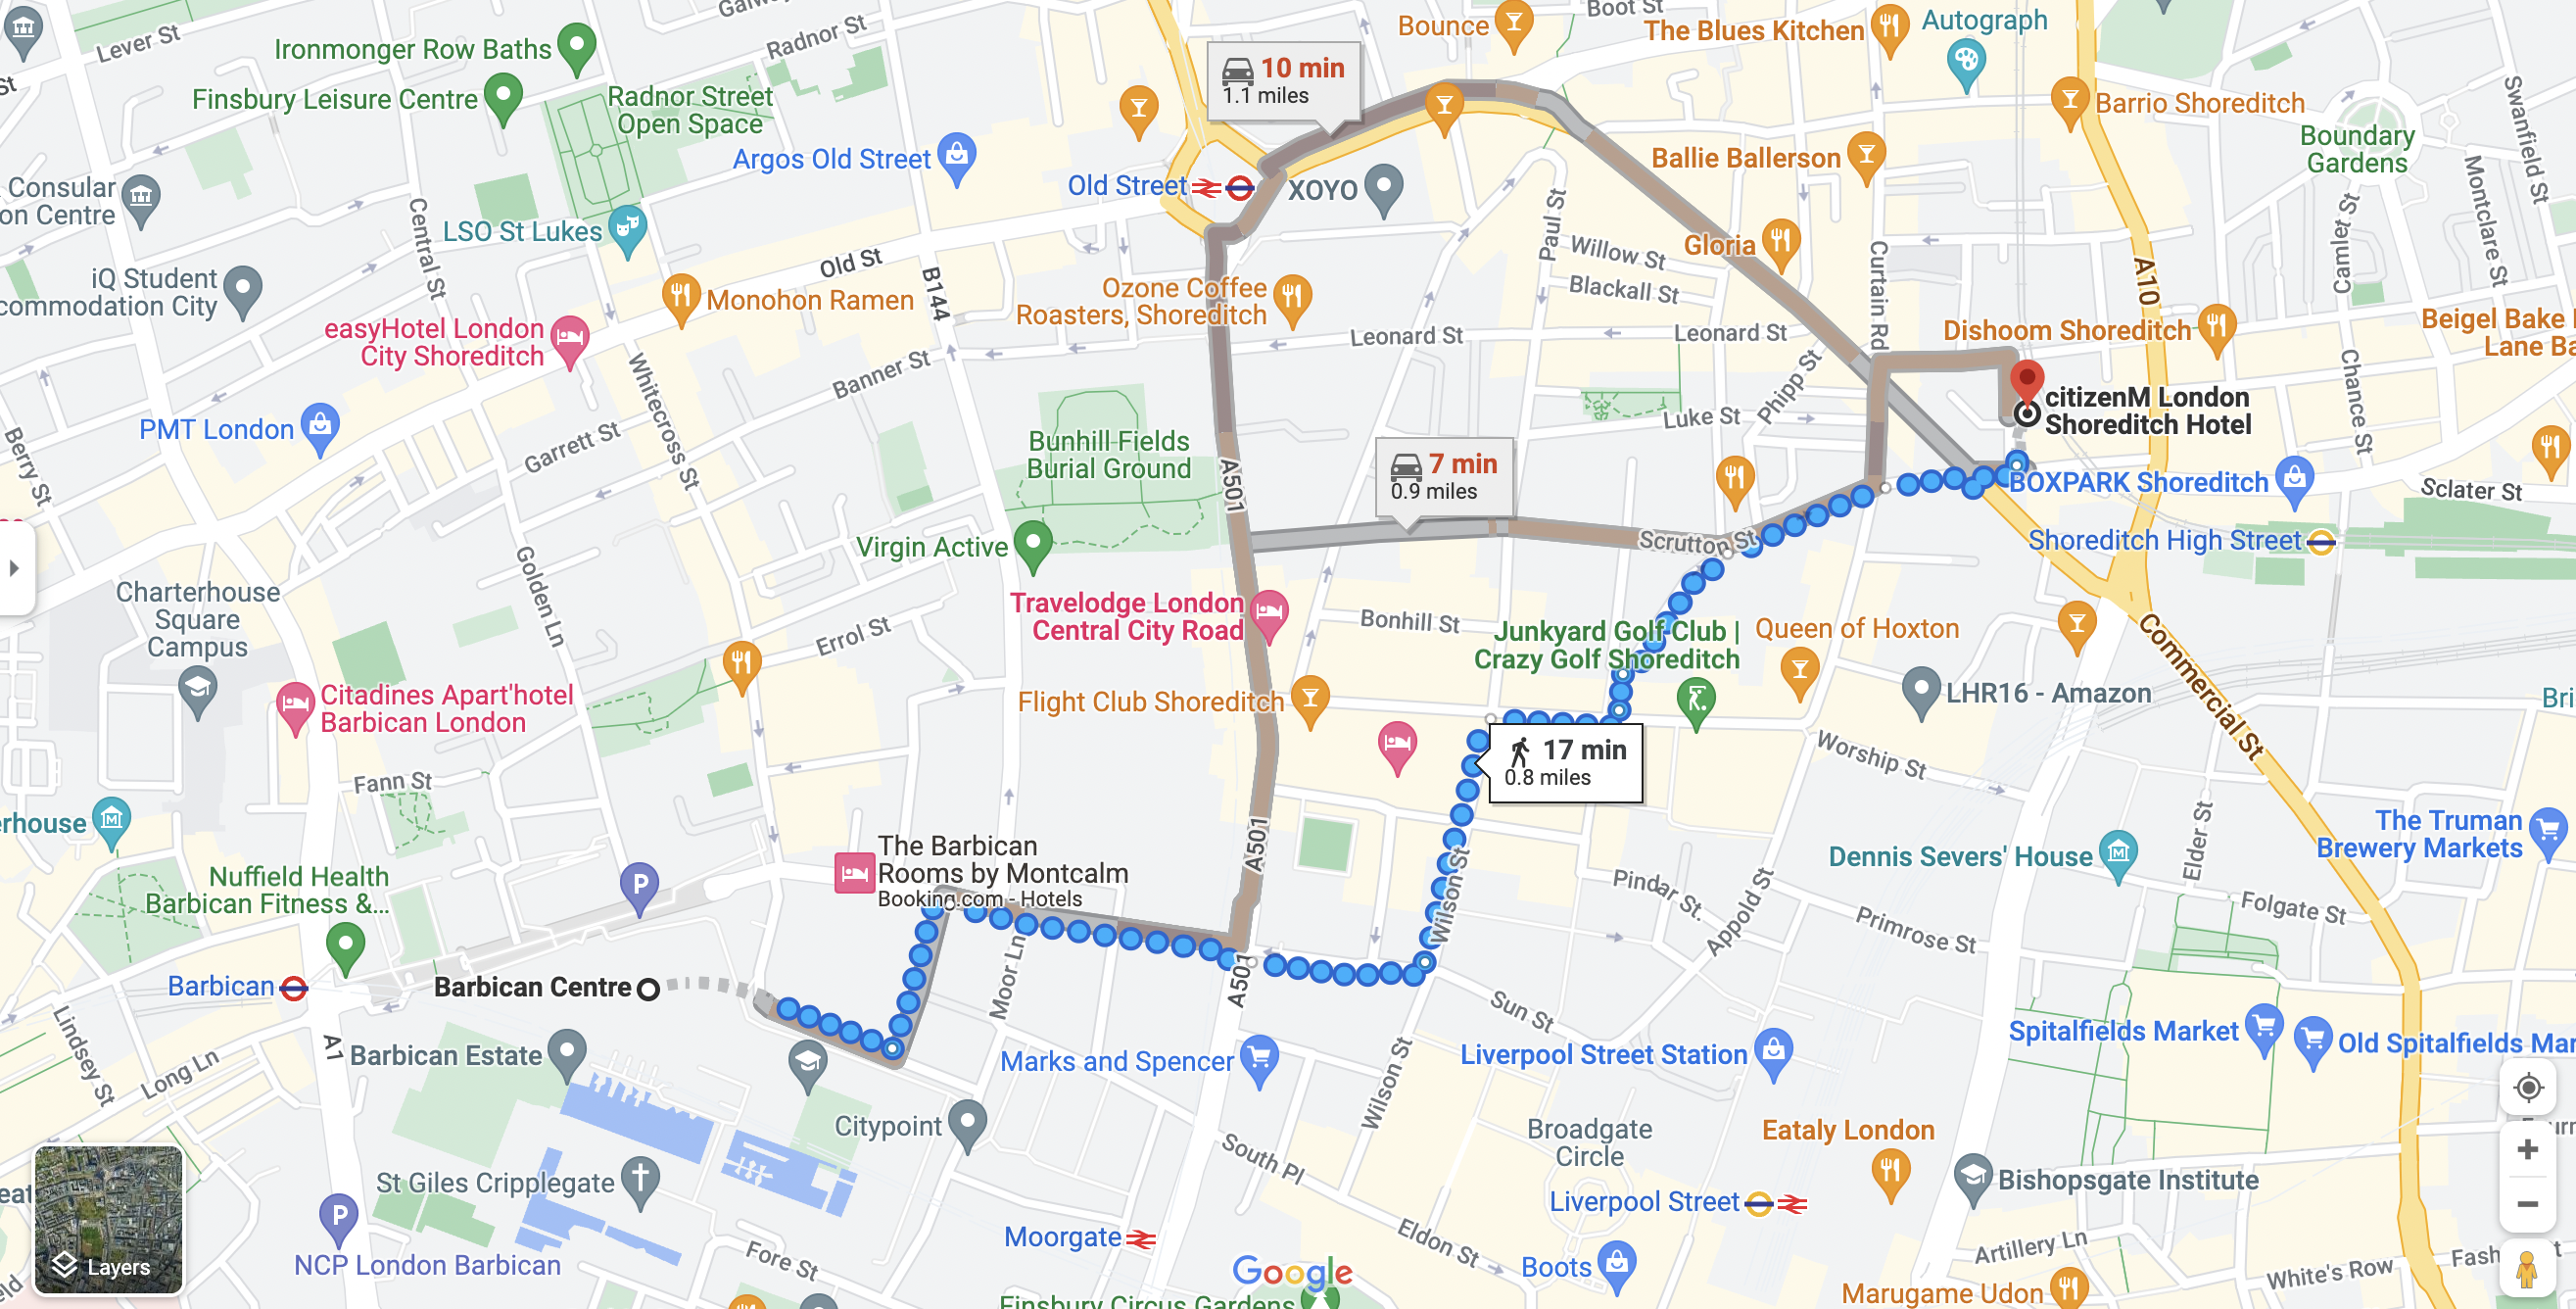 Google maps directions from Barbican Centre to citizenM London Shoreditch Hotel